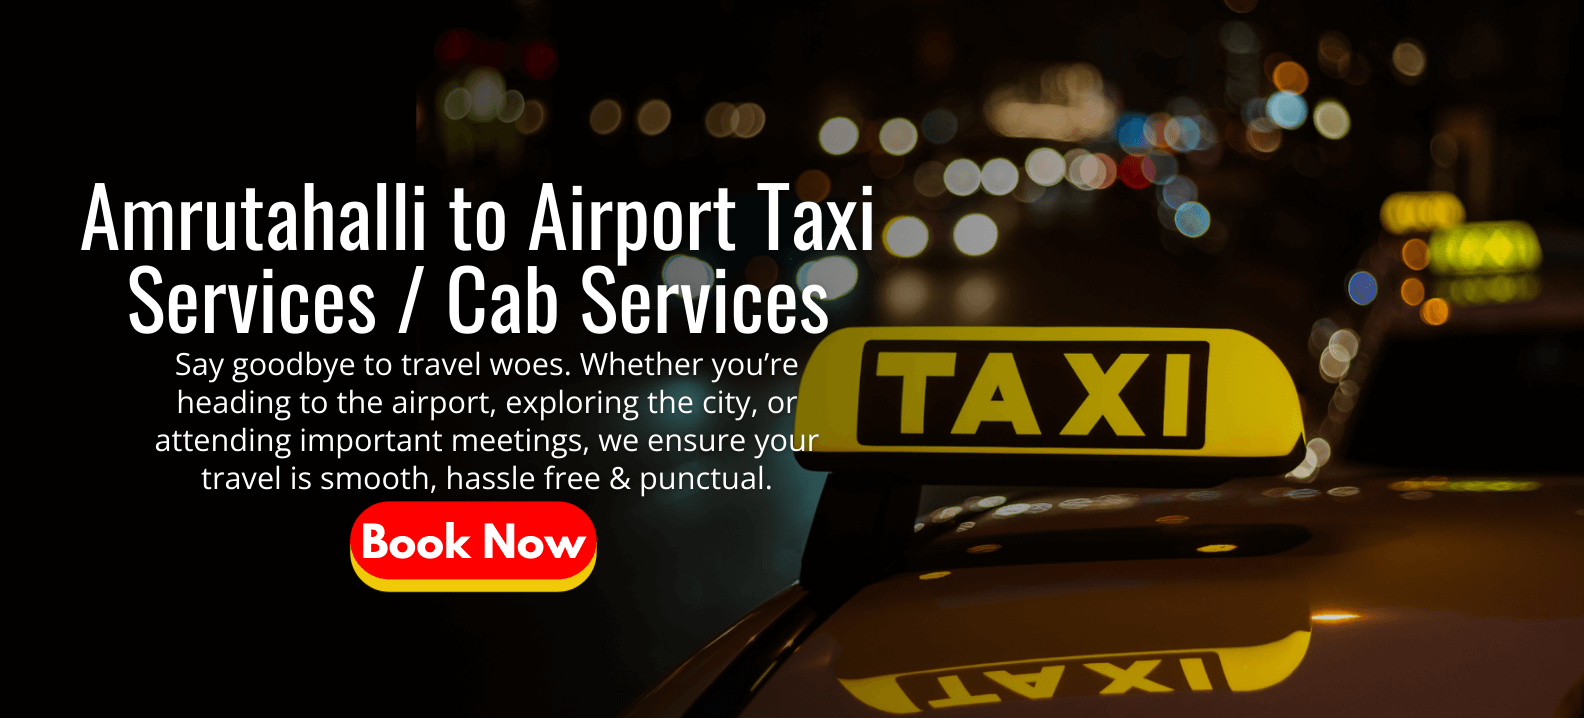 Amrutahalli to Airport Taxi Services Cab Services